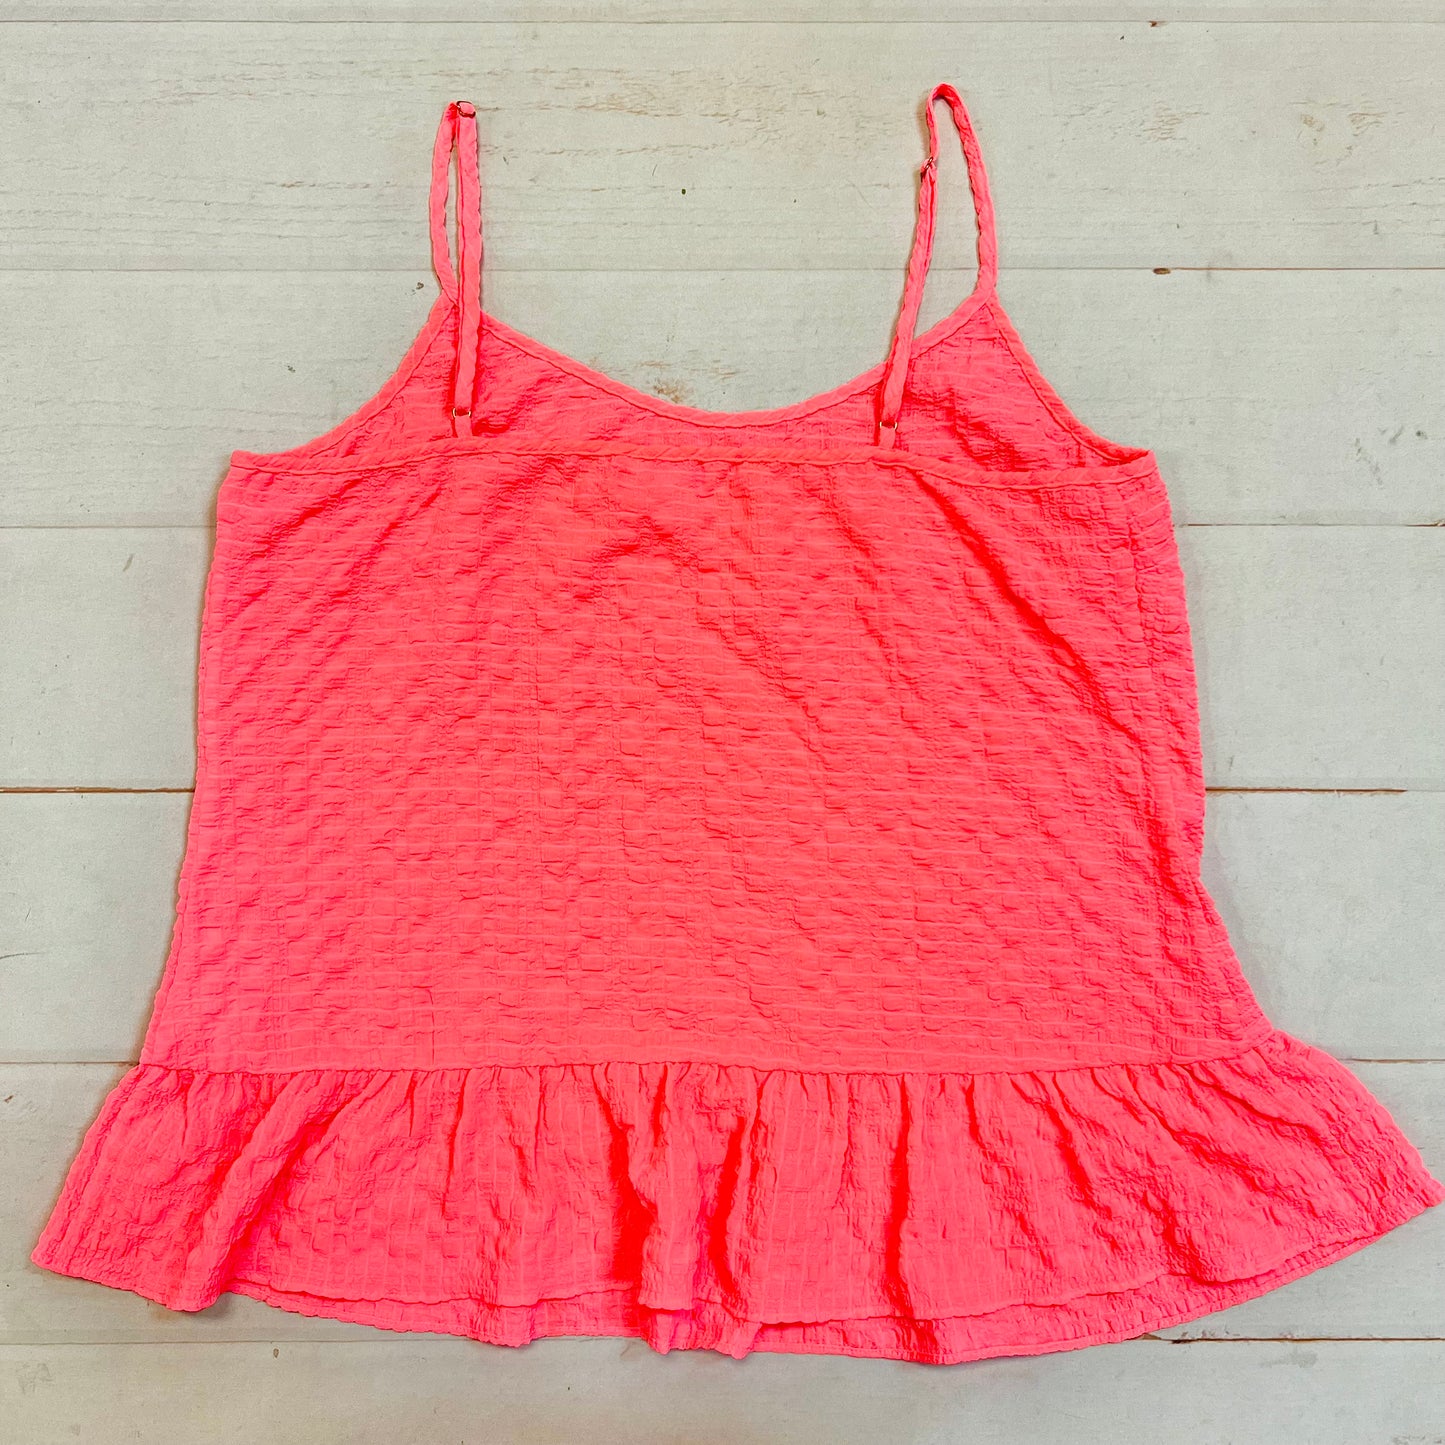 Top Sleeveless Designer By Lilly Pulitzer  Size: M